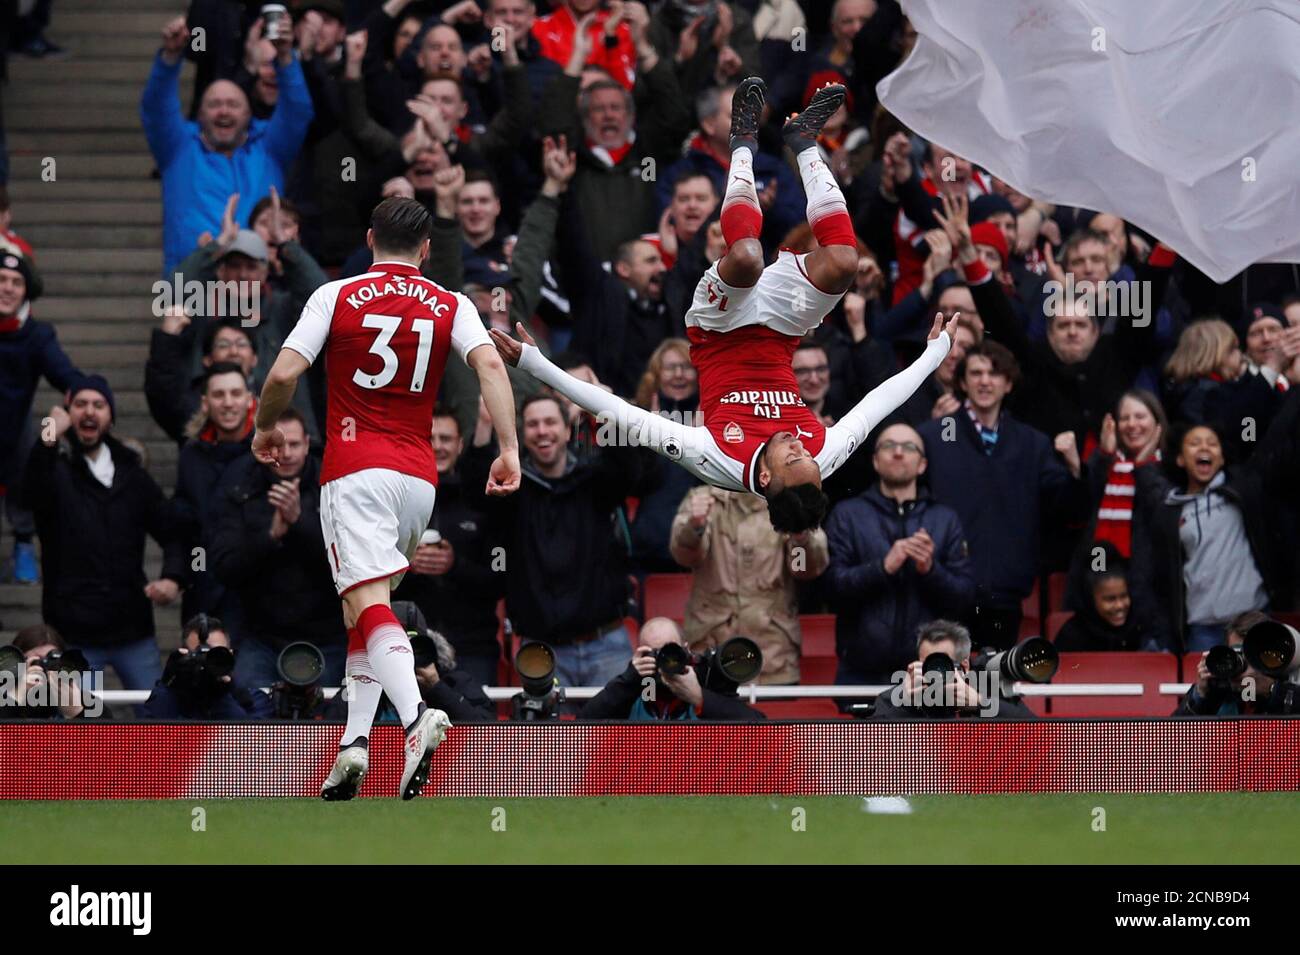 Soccer Football - Premier League - Arsenal vs Watford - Emirates Stadium, London, Britain - March 11, 2018   Arsenal's Pierre-Emerick Aubameyang celebrates scoring their second goal    REUTERS/Eddie Keogh    EDITORIAL USE ONLY. No use with unauthorized audio, video, data, fixture lists, club/league logos or "live" services. Online in-match use limited to 75 images, no video emulation. No use in betting, games or single club/league/player publications.  Please contact your account representative for further details. Stock Photo